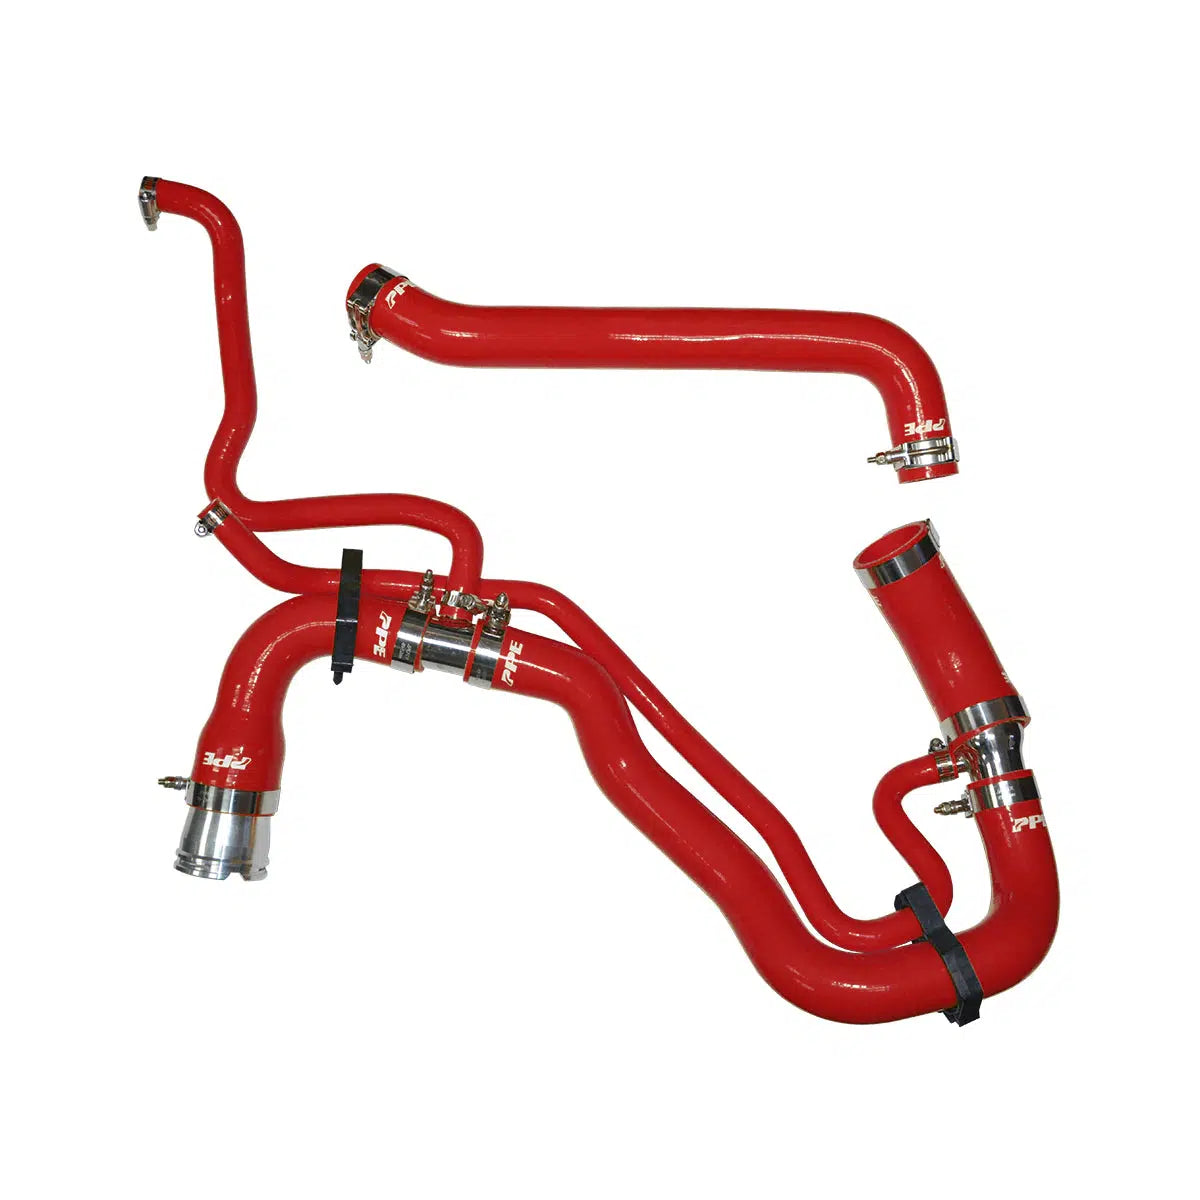 2011-2016 Duramax Silicone Upper & Lower Coolant Hose Kit (11902xxxx)-Coolant Hose Kit-PPE-Dirty Diesel Customs